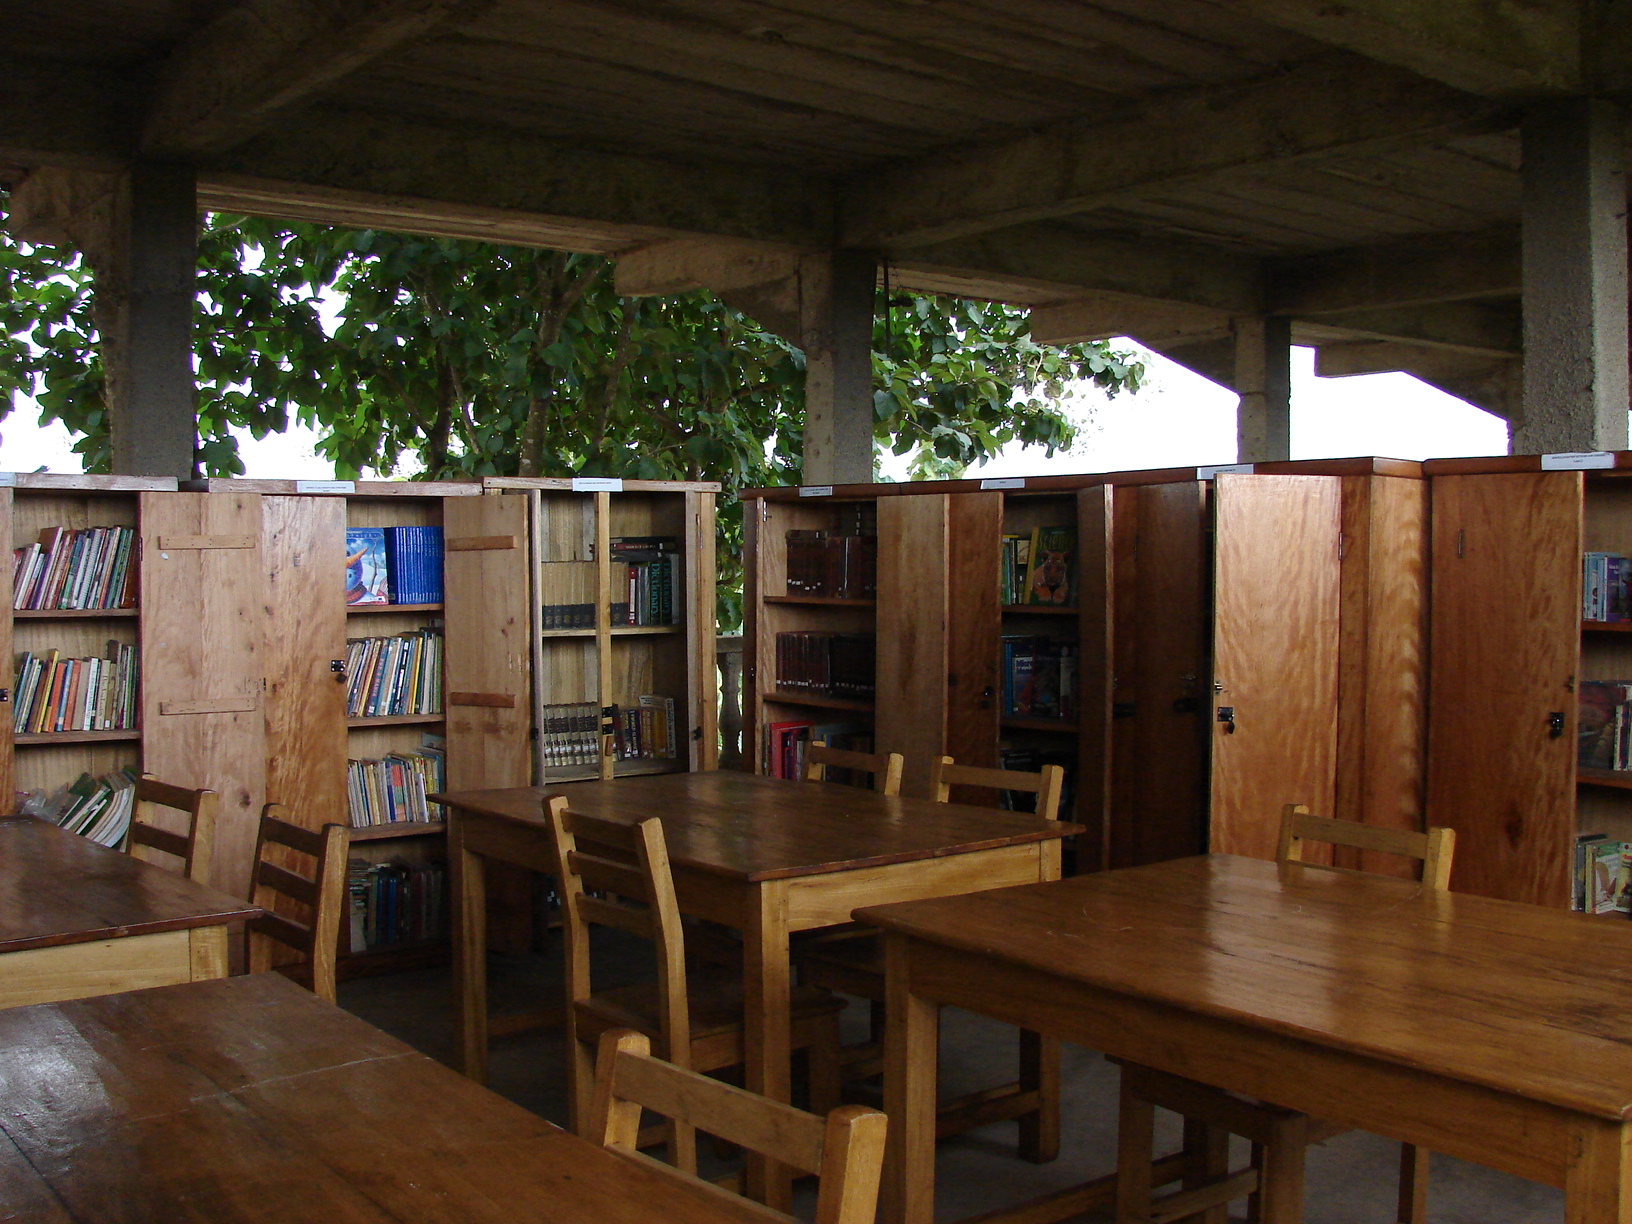 library cupboards and books